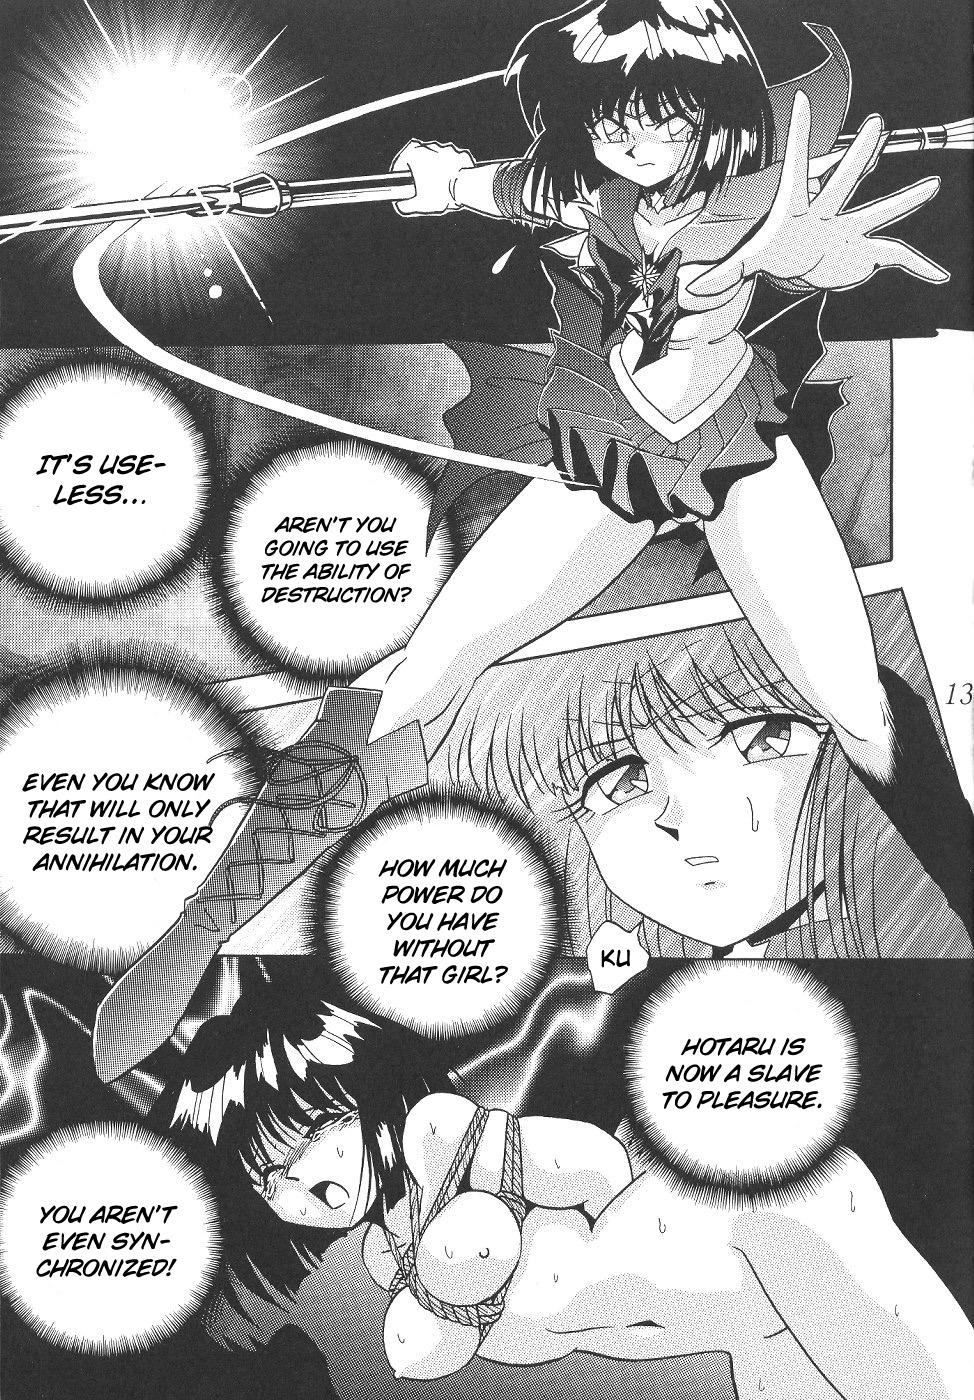 Free Fucking Silent Saturn 12 - Sailor moon Reverse Cowgirl - Page 13